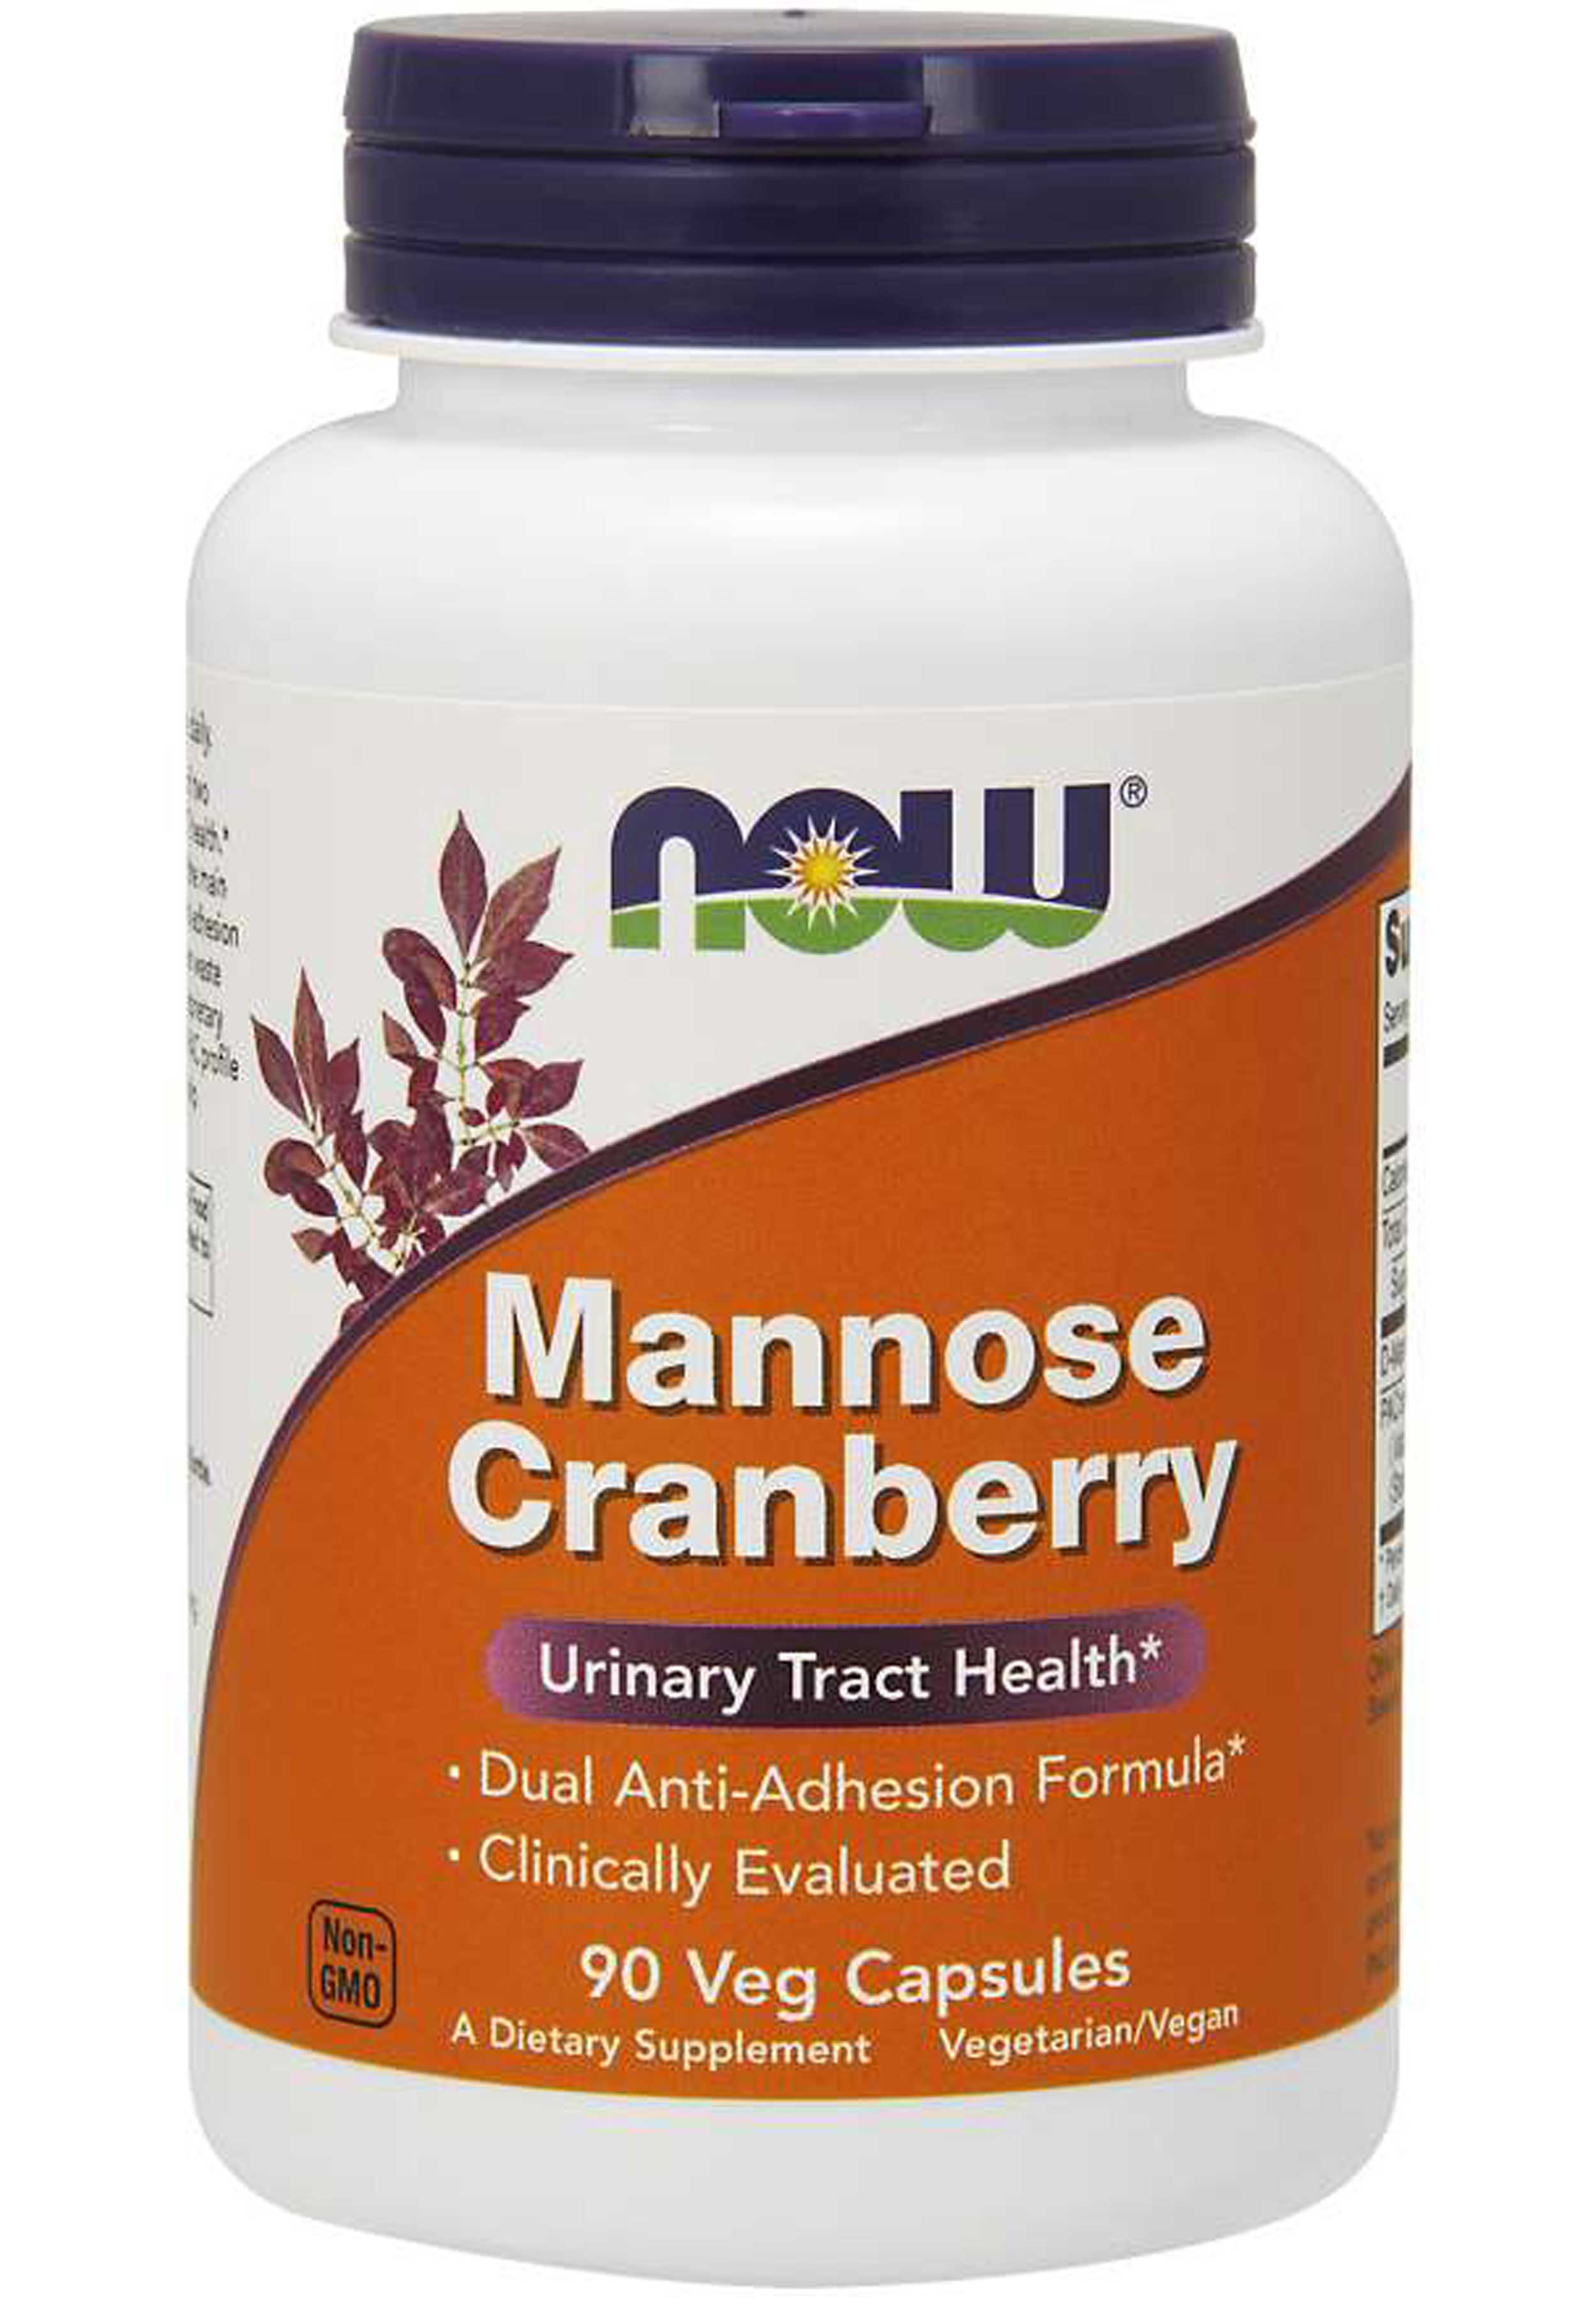 NOW Mannose Cranberry